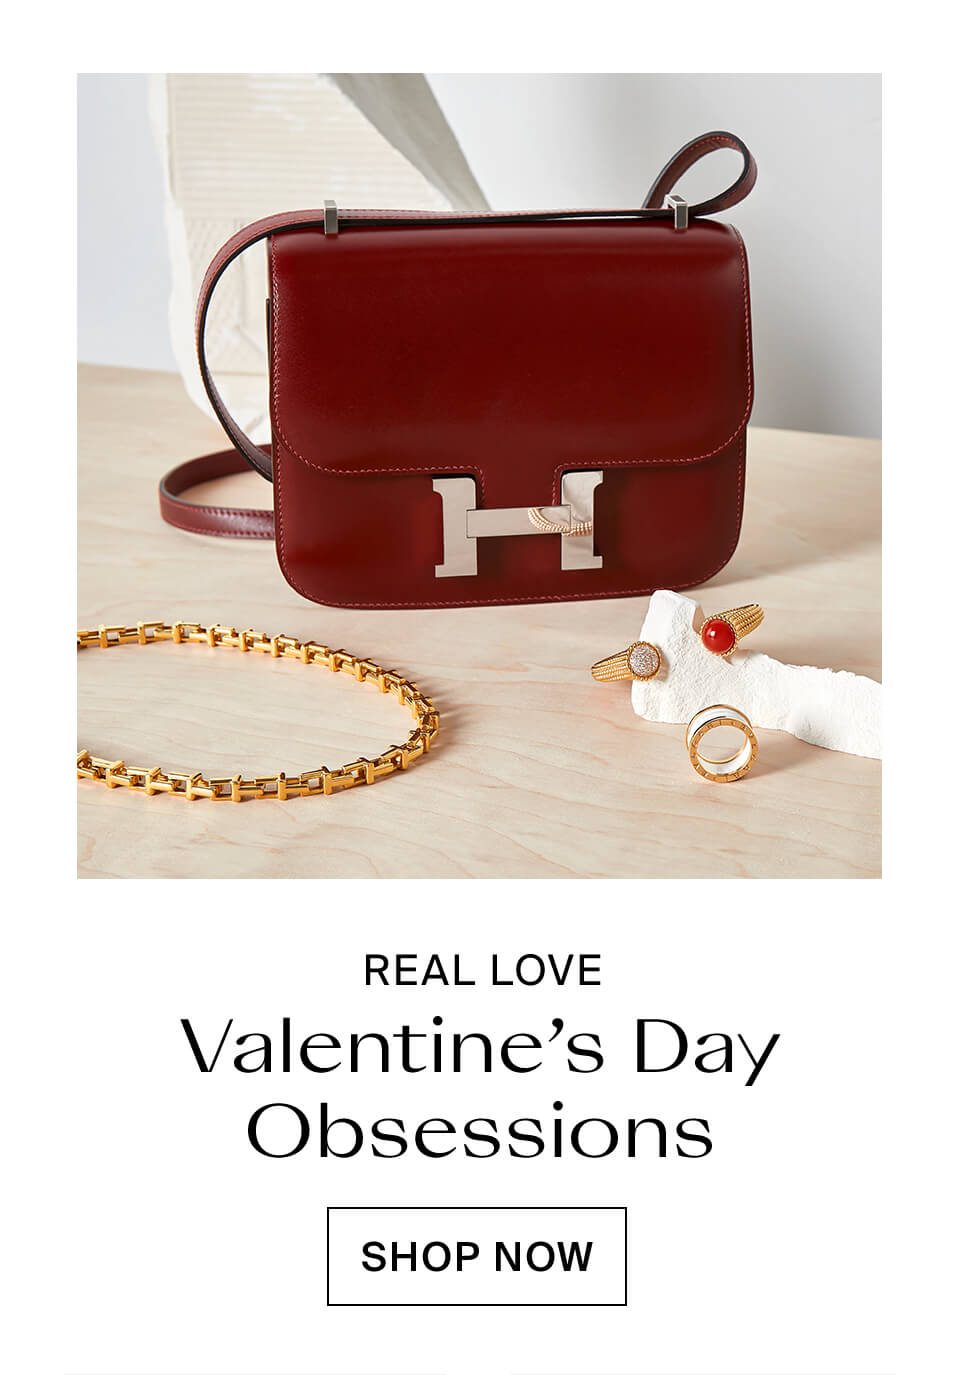 Real Love: Valetine's Day Obsessions